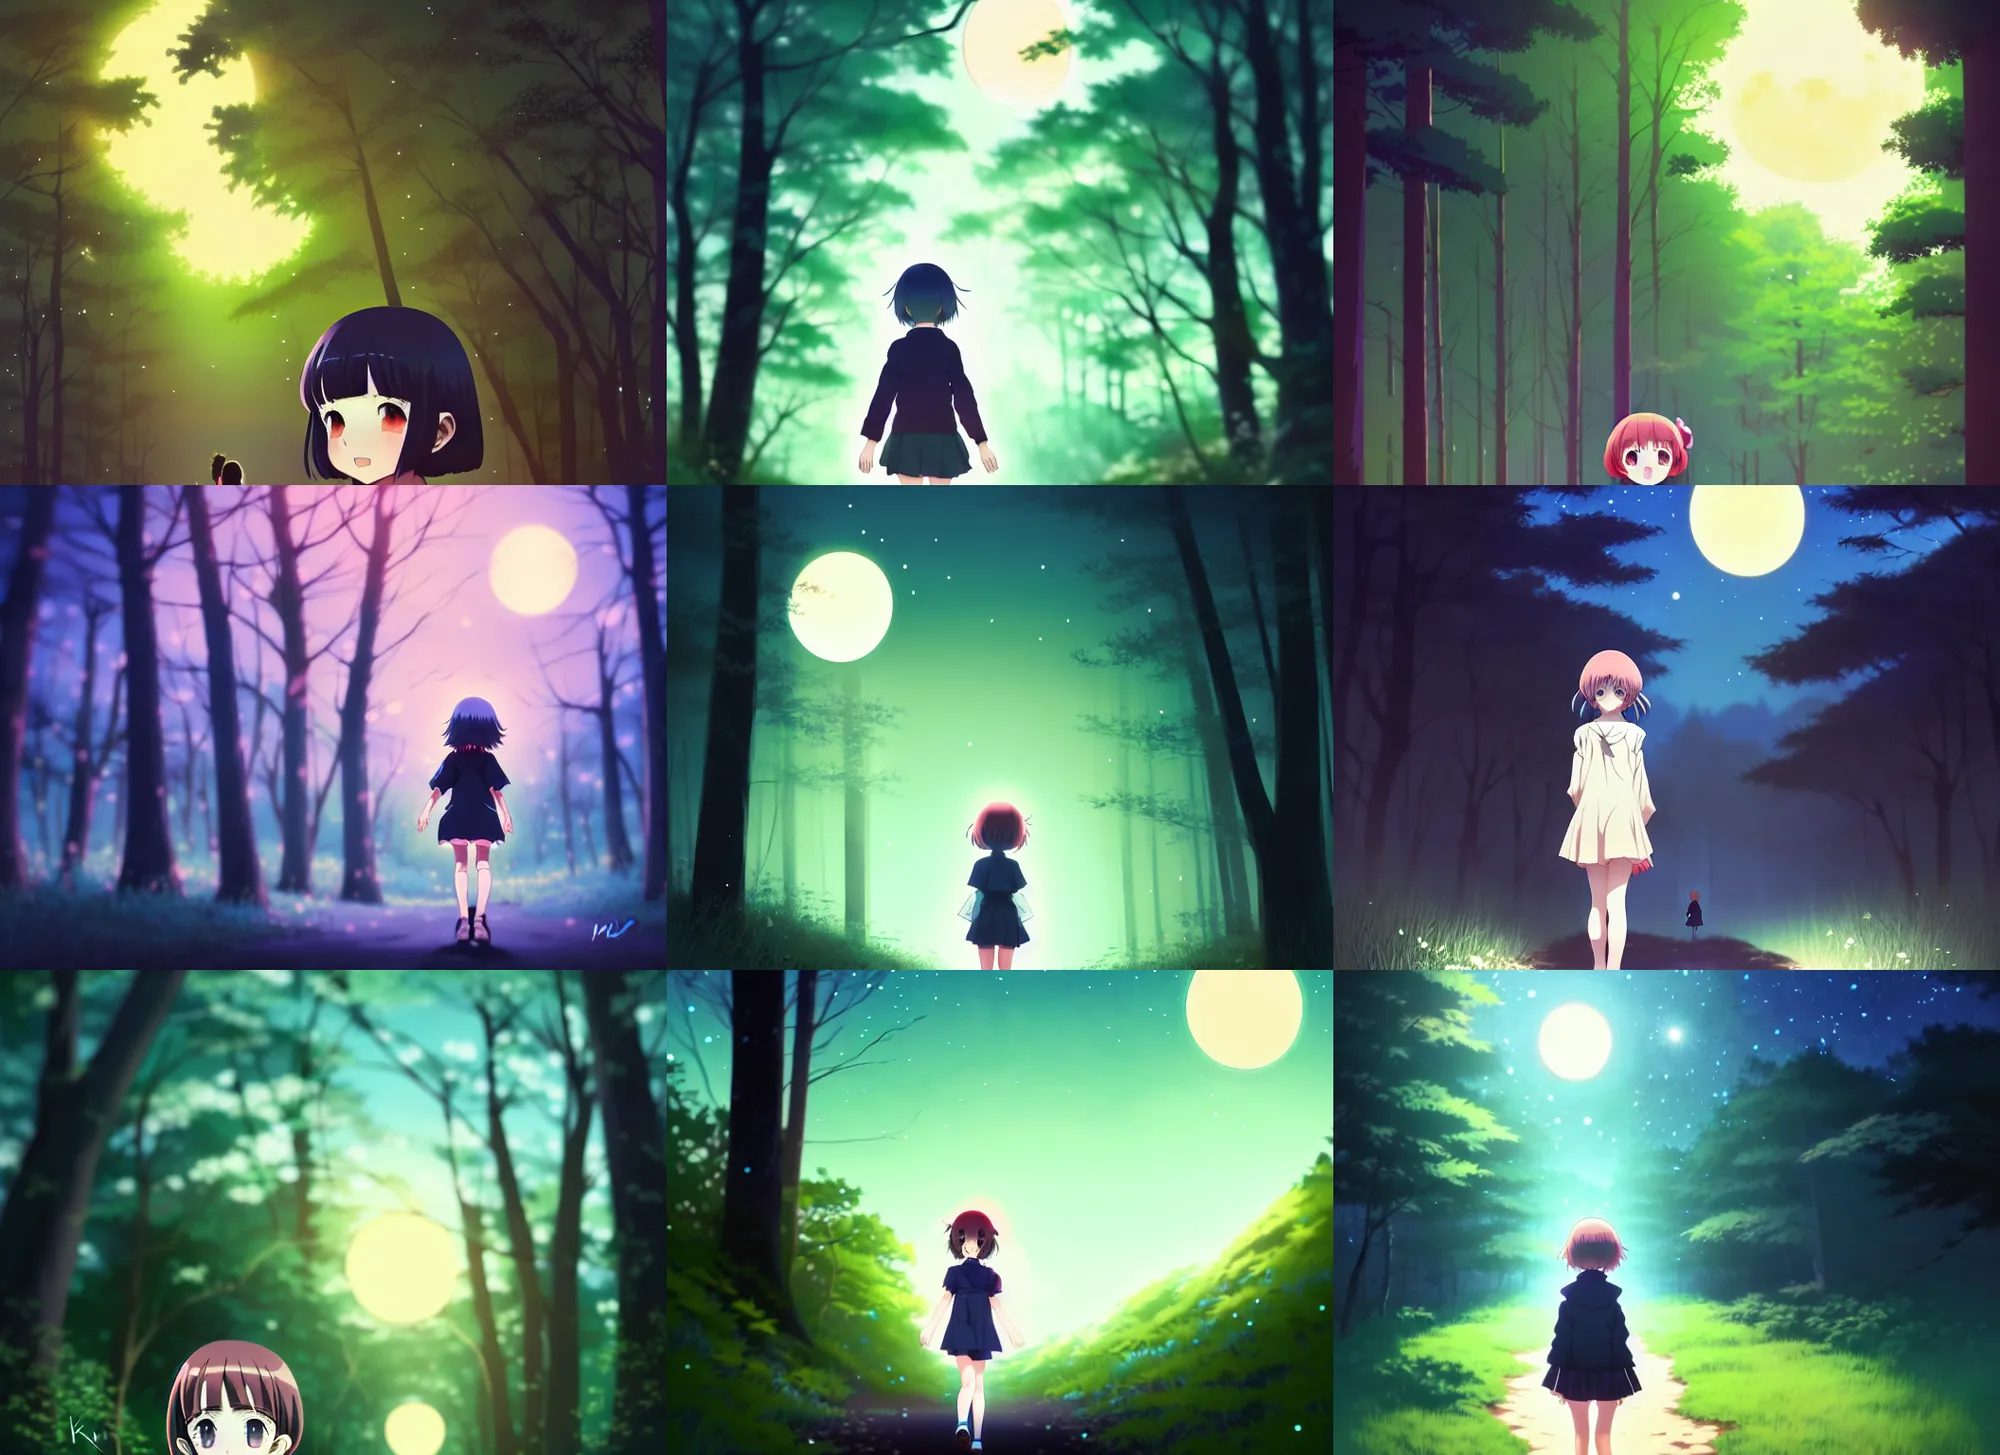 Prompt: anime visual, portrait of a curious young girl walking in a forest at night, very dark, moon, cute face by ilya kuvshinov, yoh yoshinari, dynamic pose, dynamic perspective, rounded eyes, kyoani, natsume yuujinchou, smooth facial features, makoto shinkai